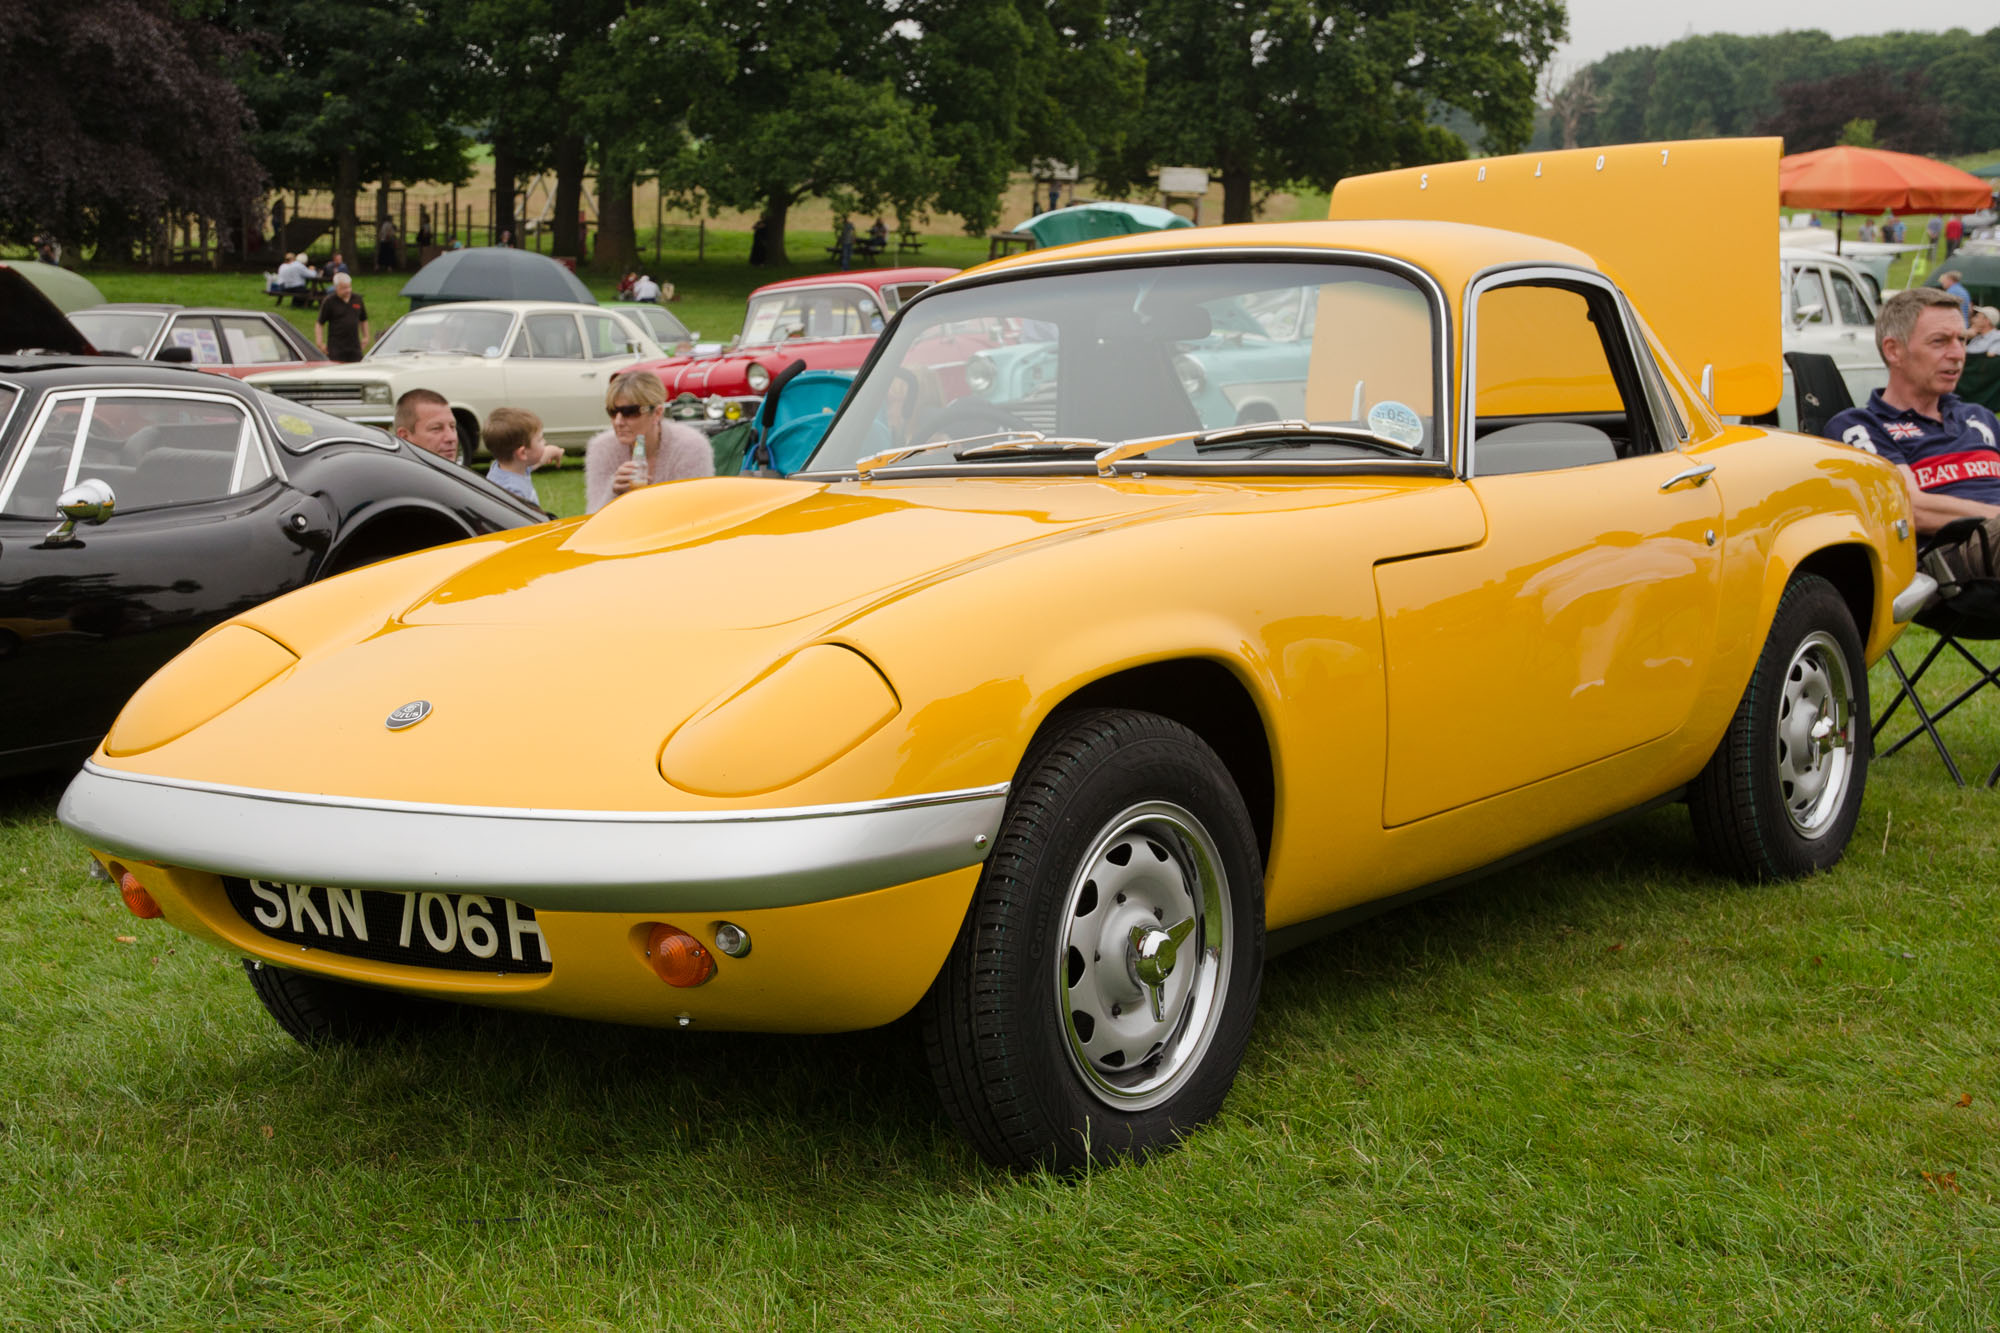 an old fashioned sports car on display at a show